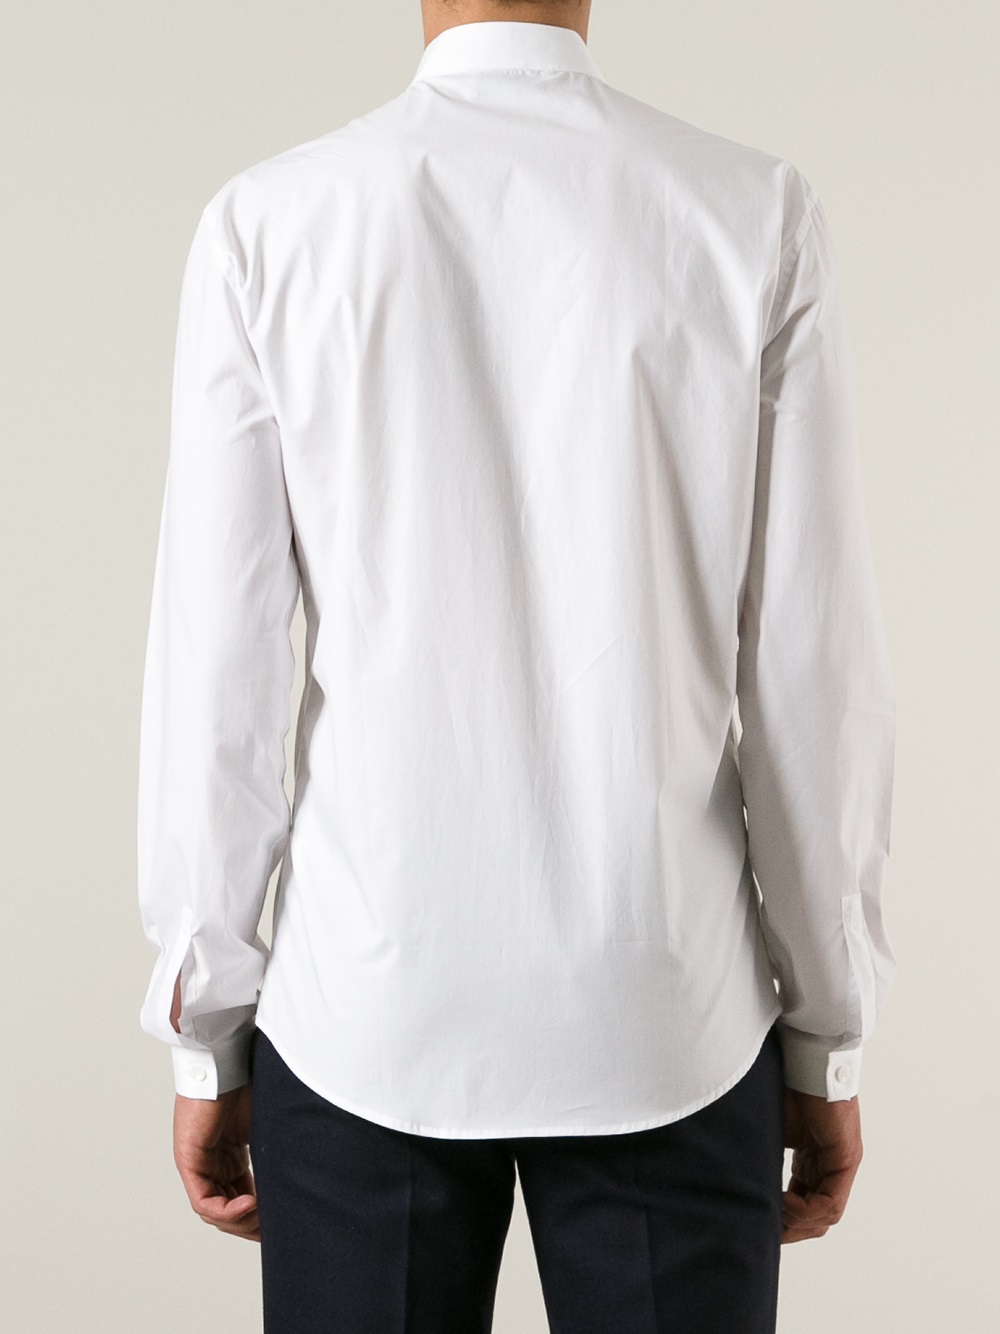 Lyst - Éditions Mr Button Up Shirt in White for Men